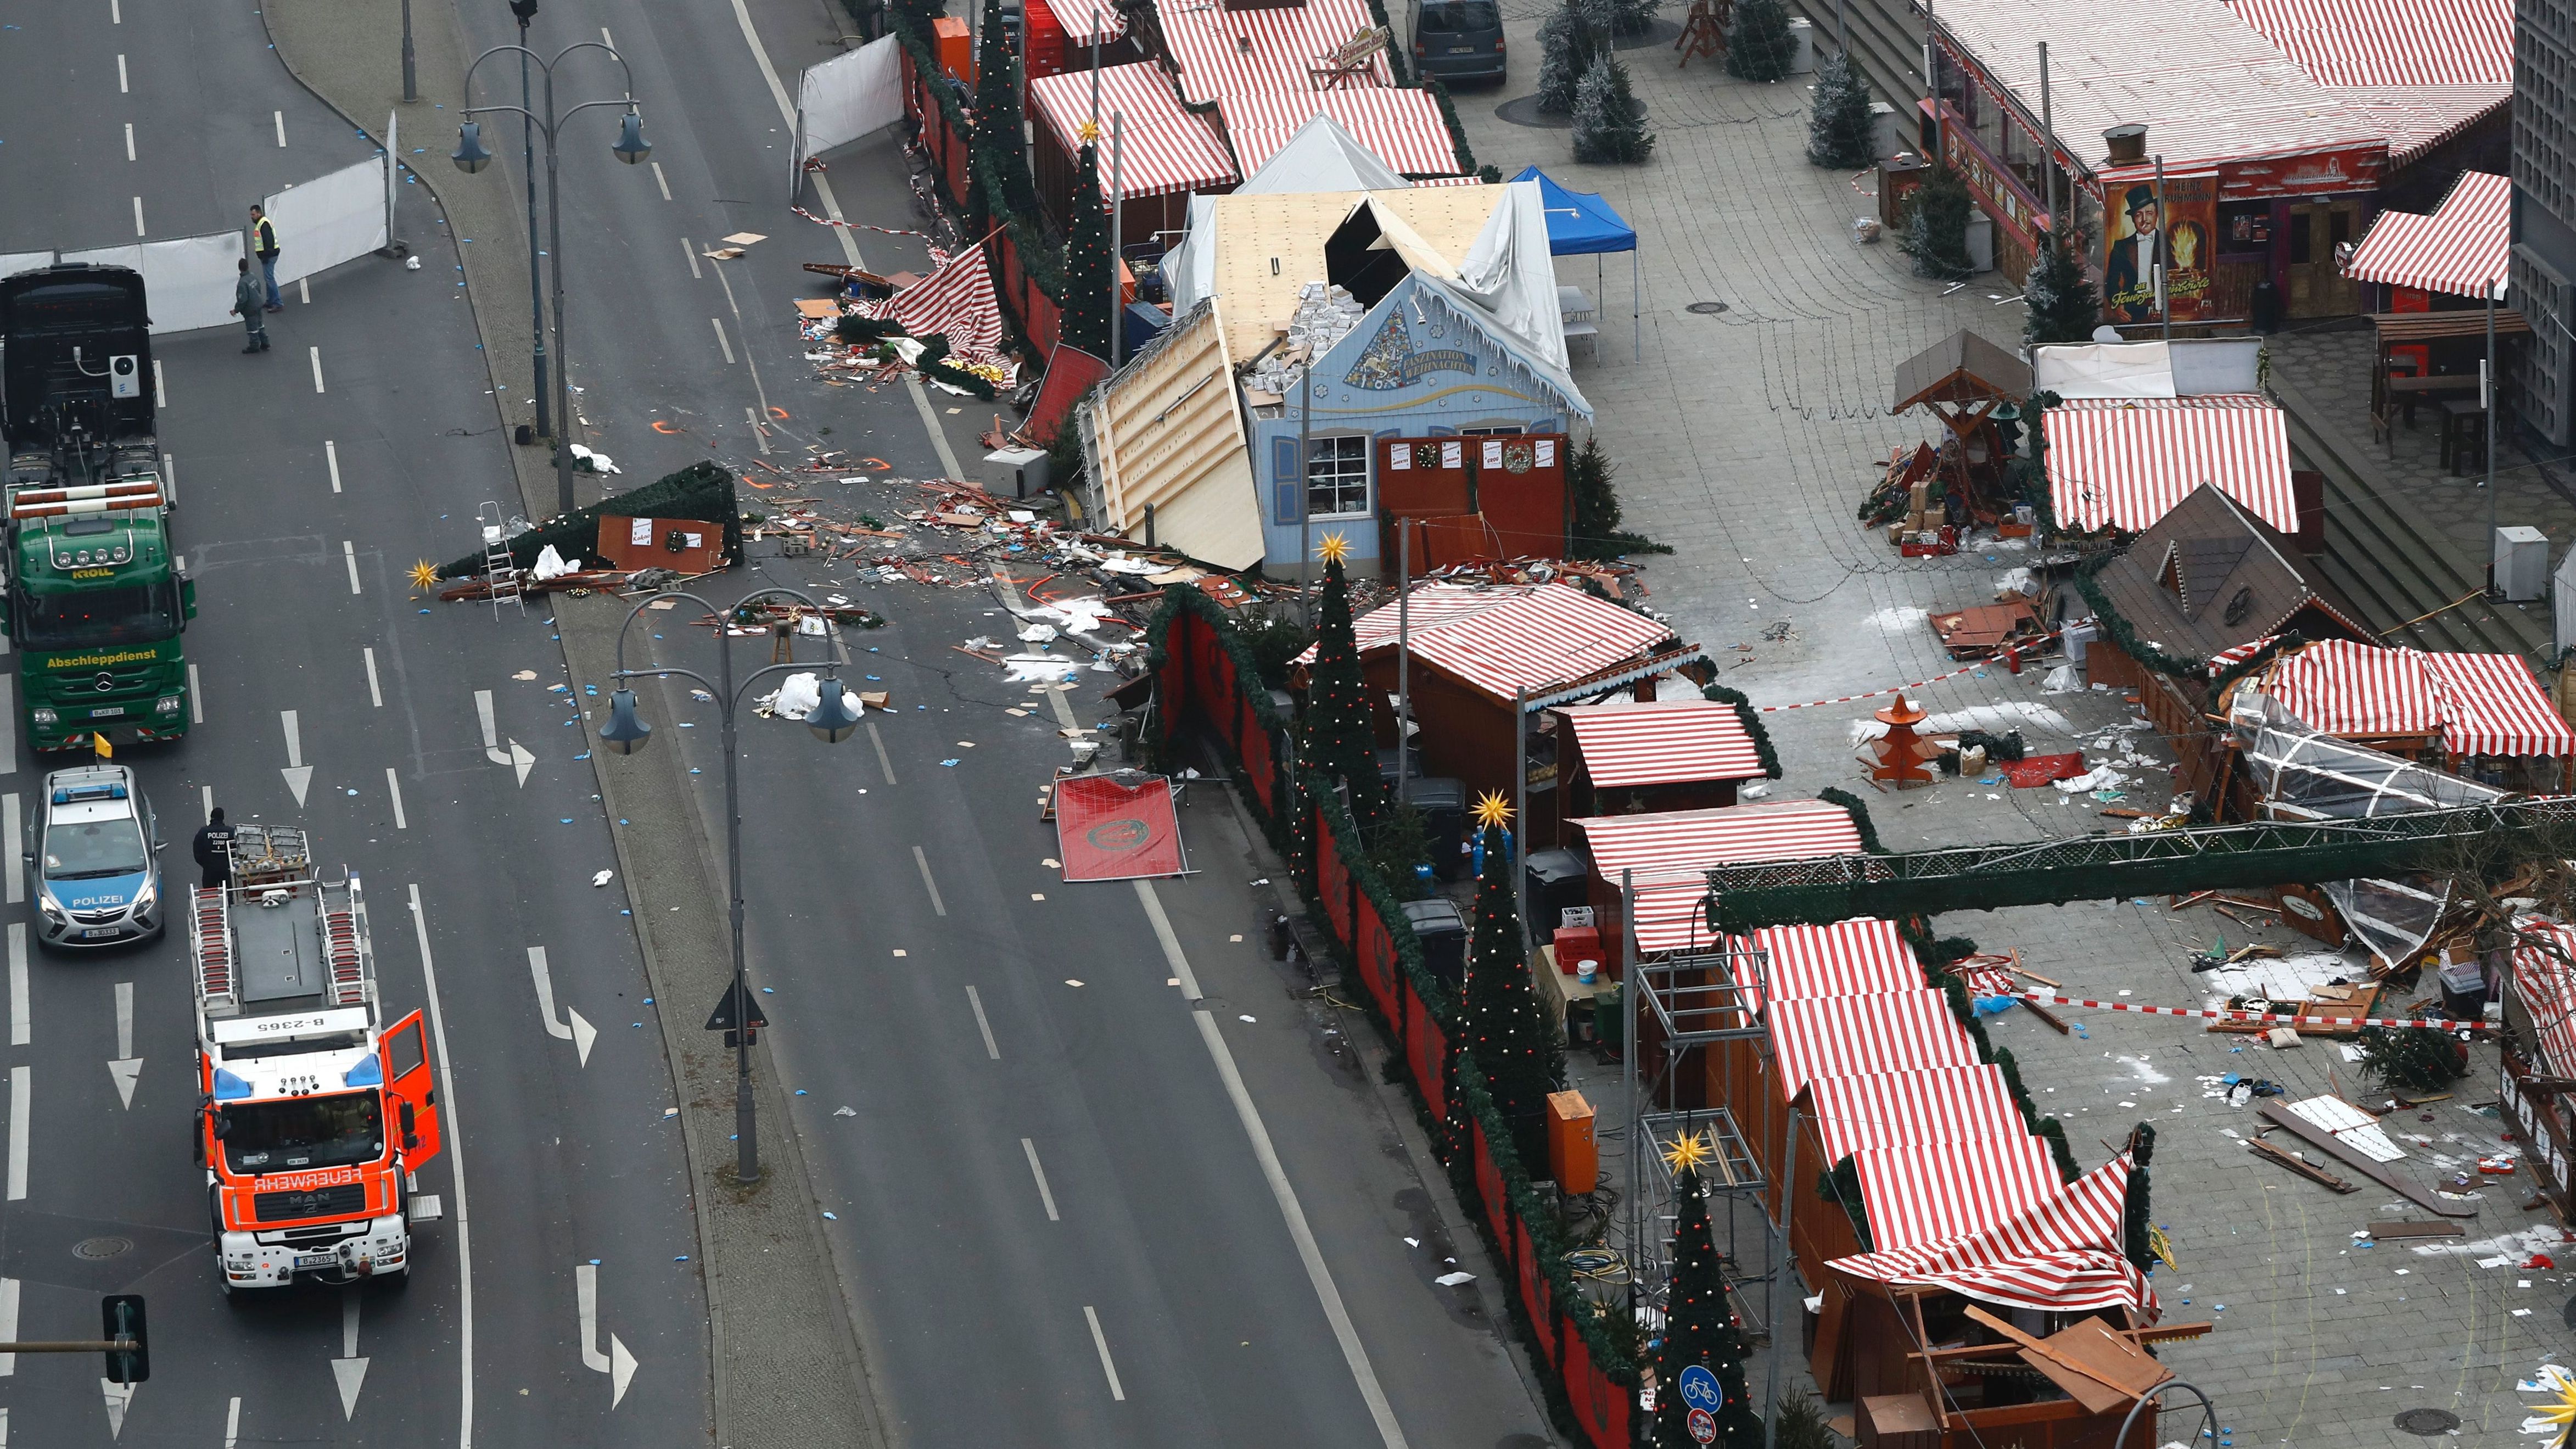 A Christmas market in central Berlin is seen on Tuesday, a day after a truck smashed into the market, killing 12 people and injuring dozens more.
